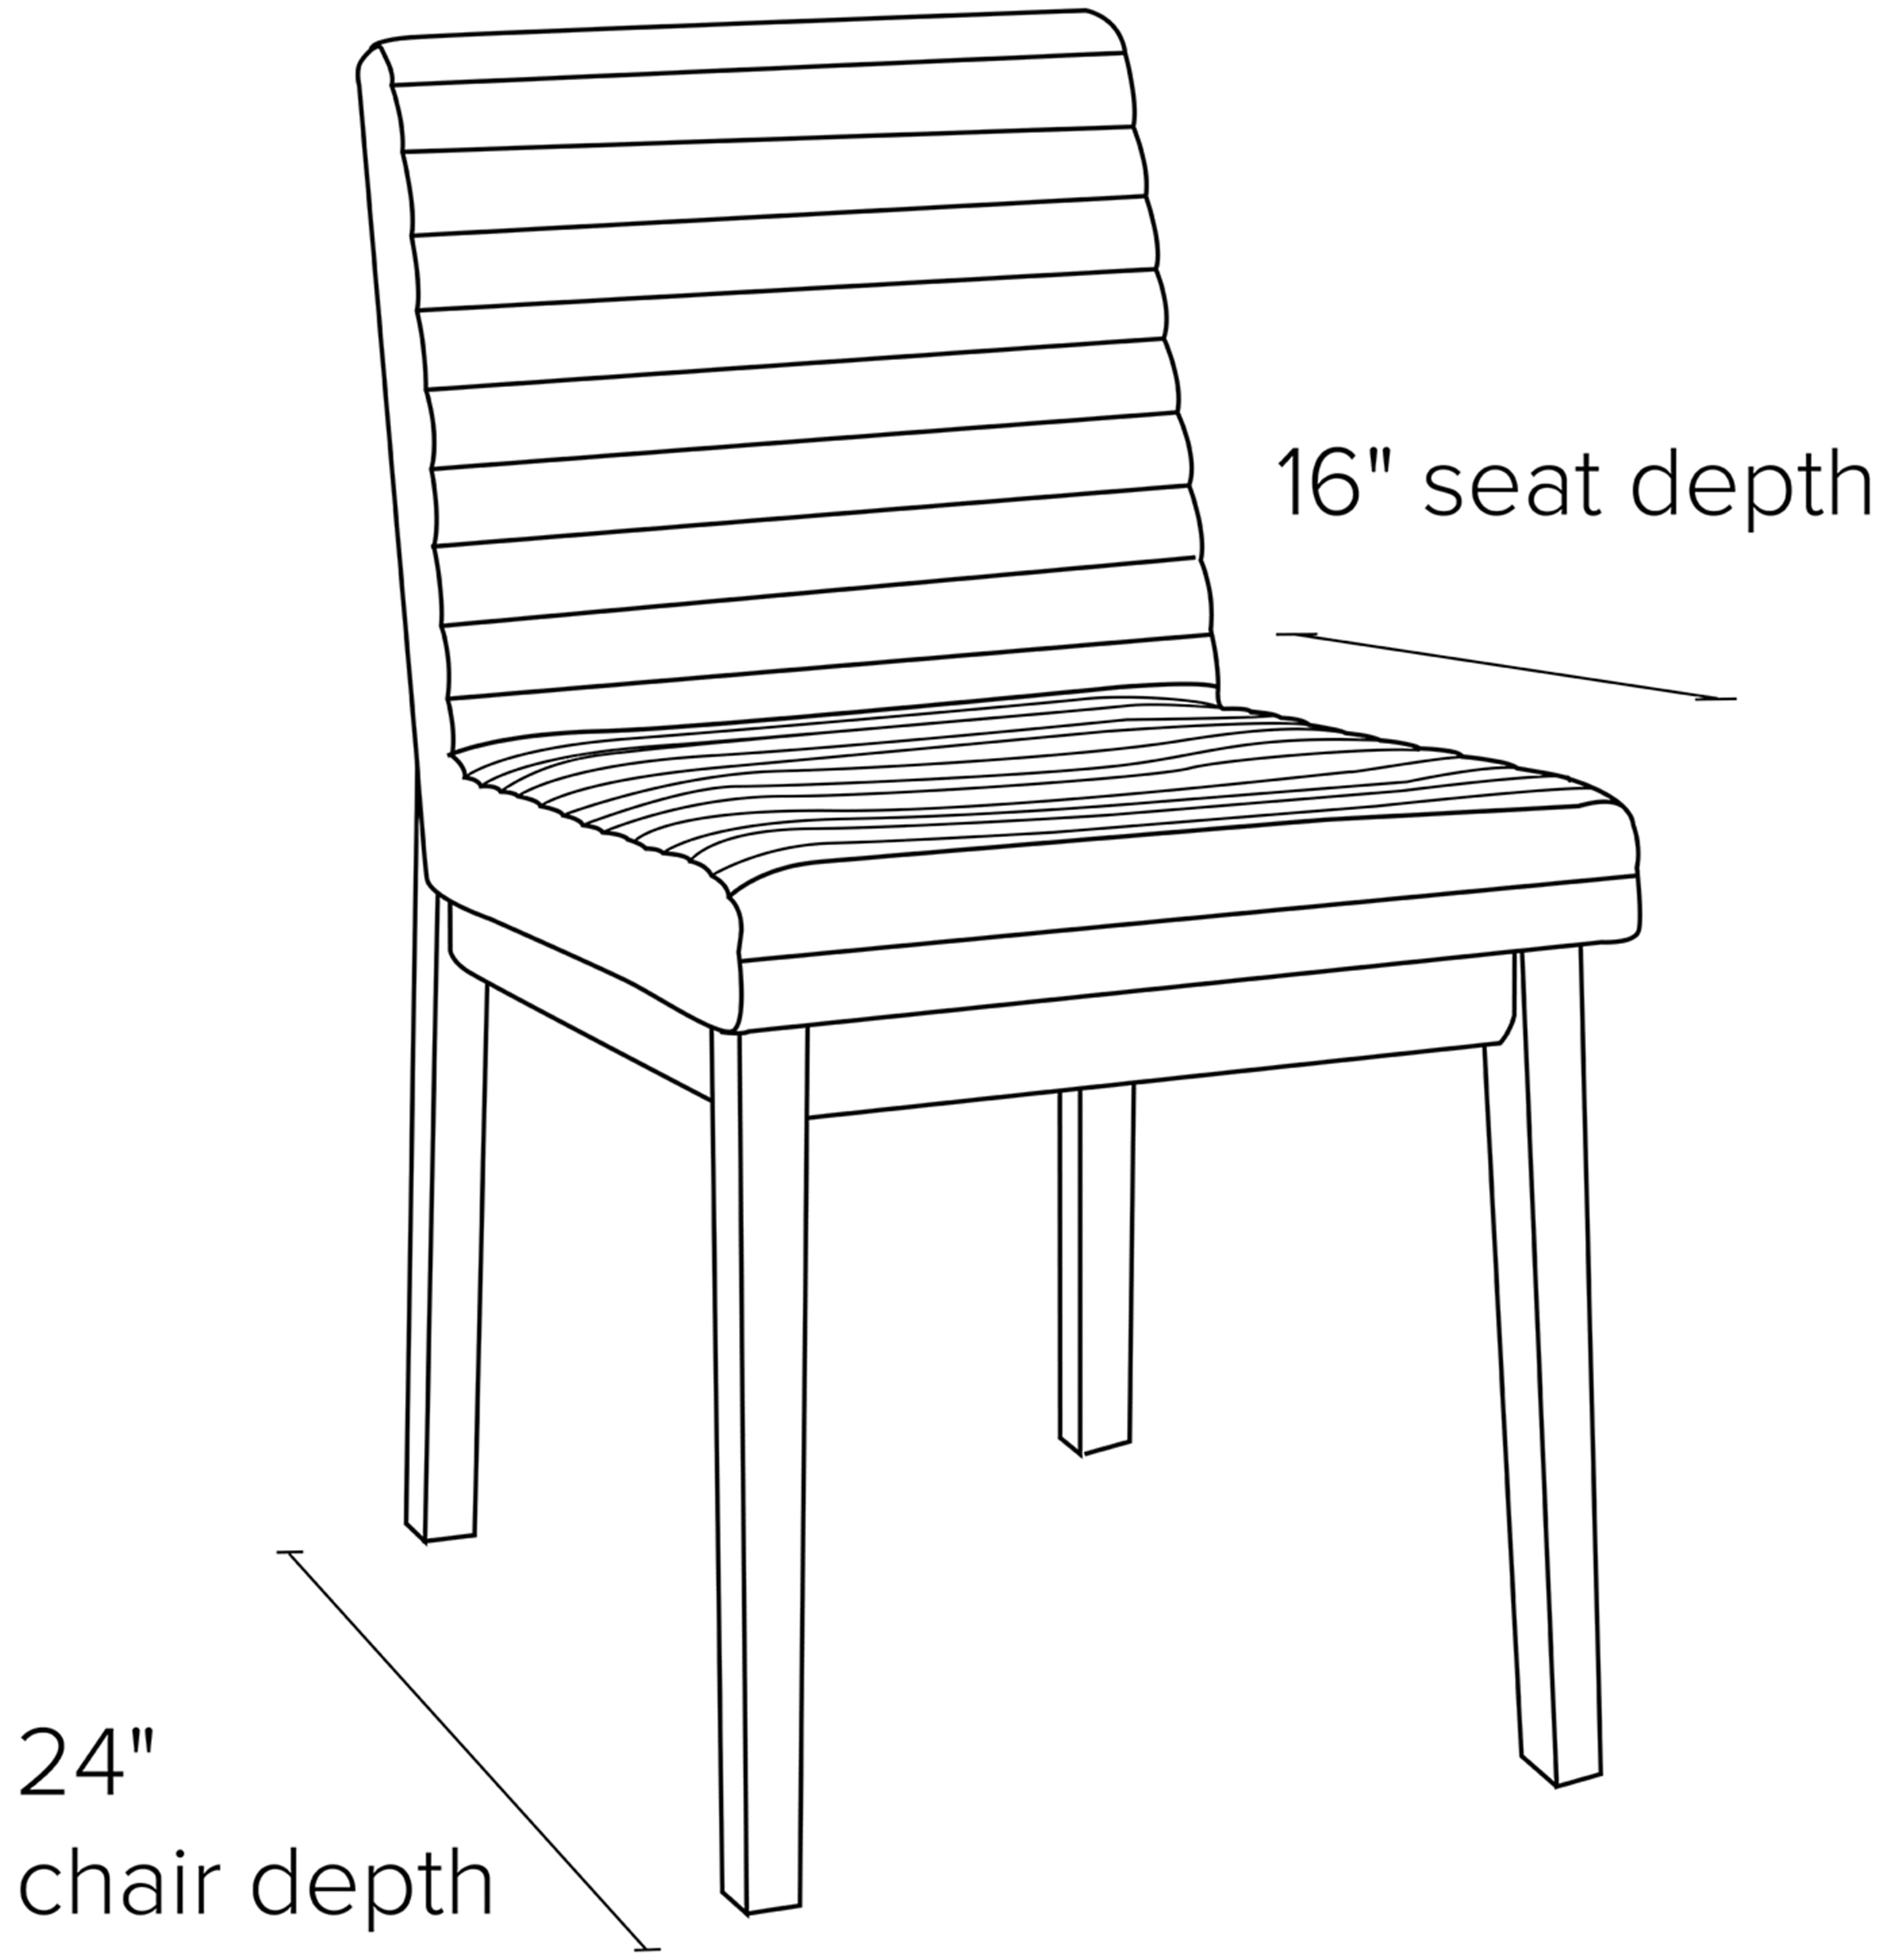 Side view dimension illustration of Olsen side chair.